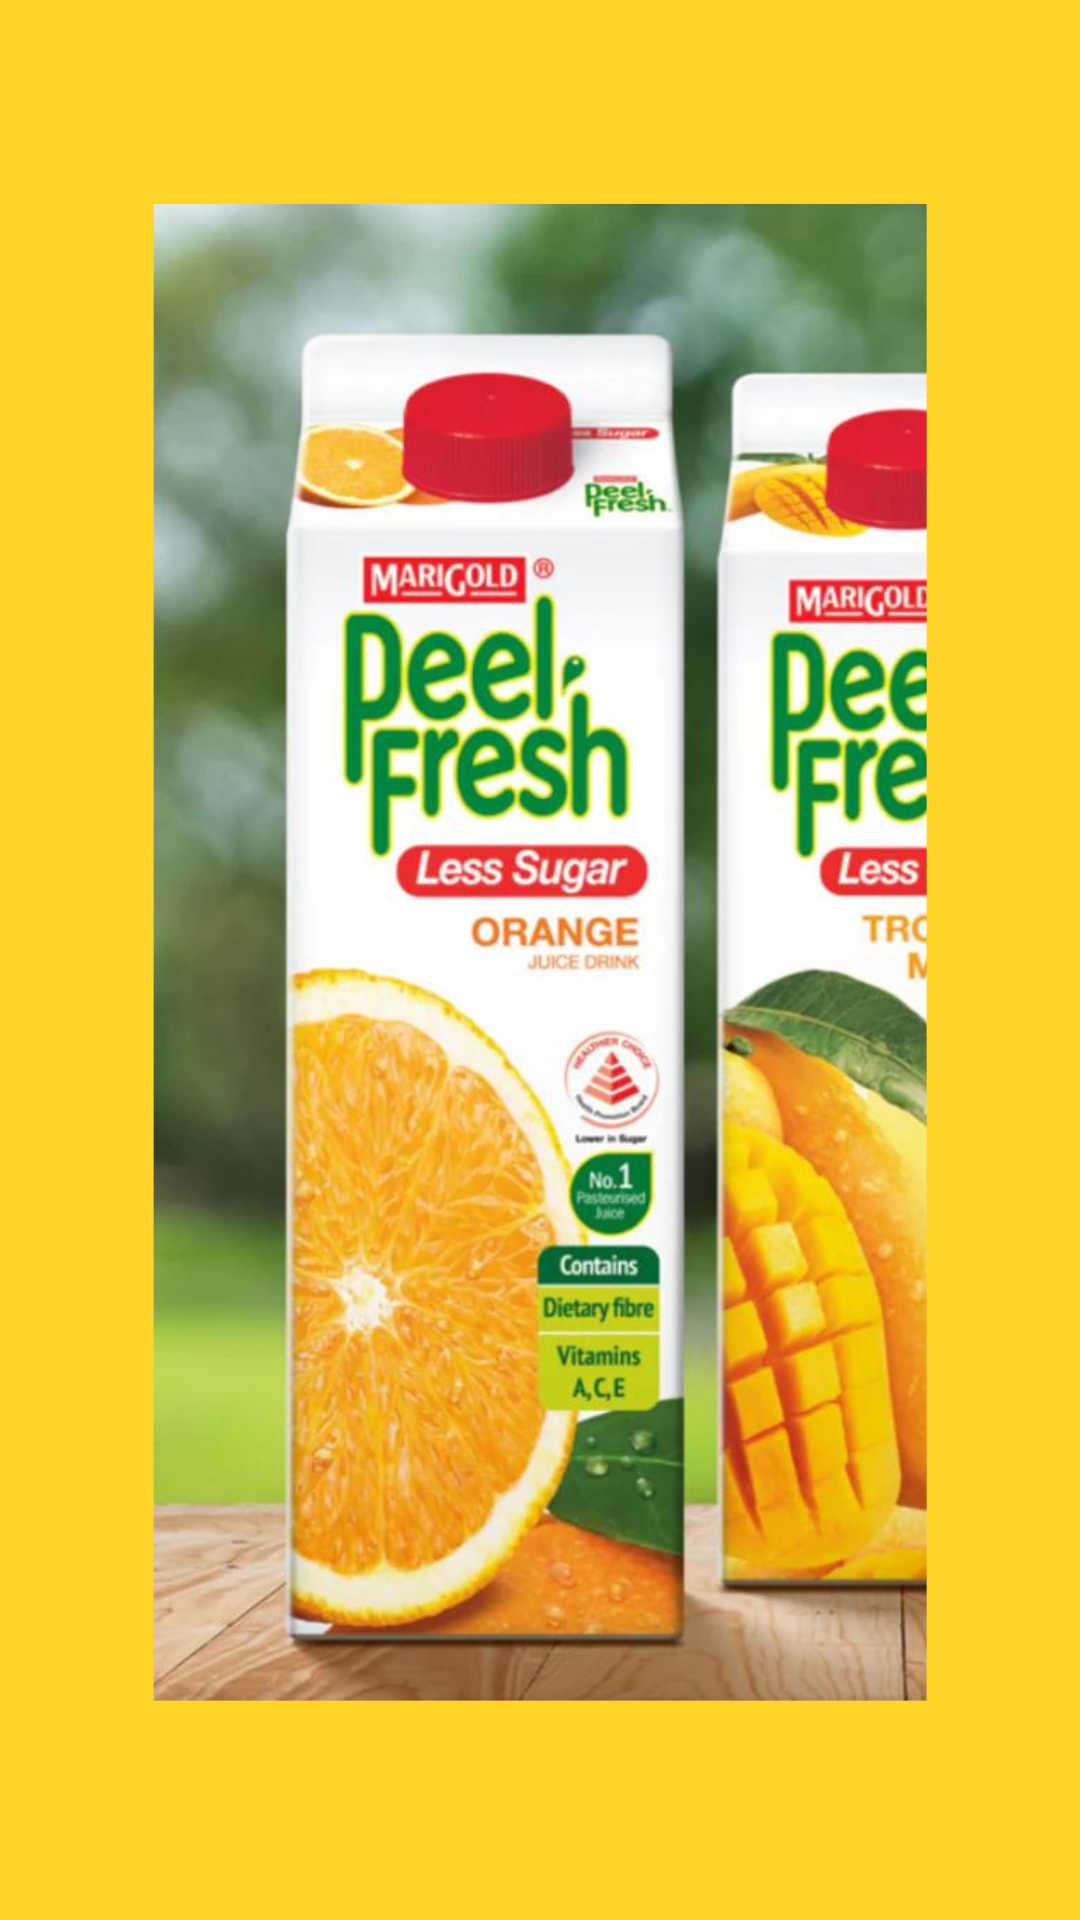 The Lowdown on Orange Juice for Vegans: Why Marigold Peel Fresh May Not Make the Cut